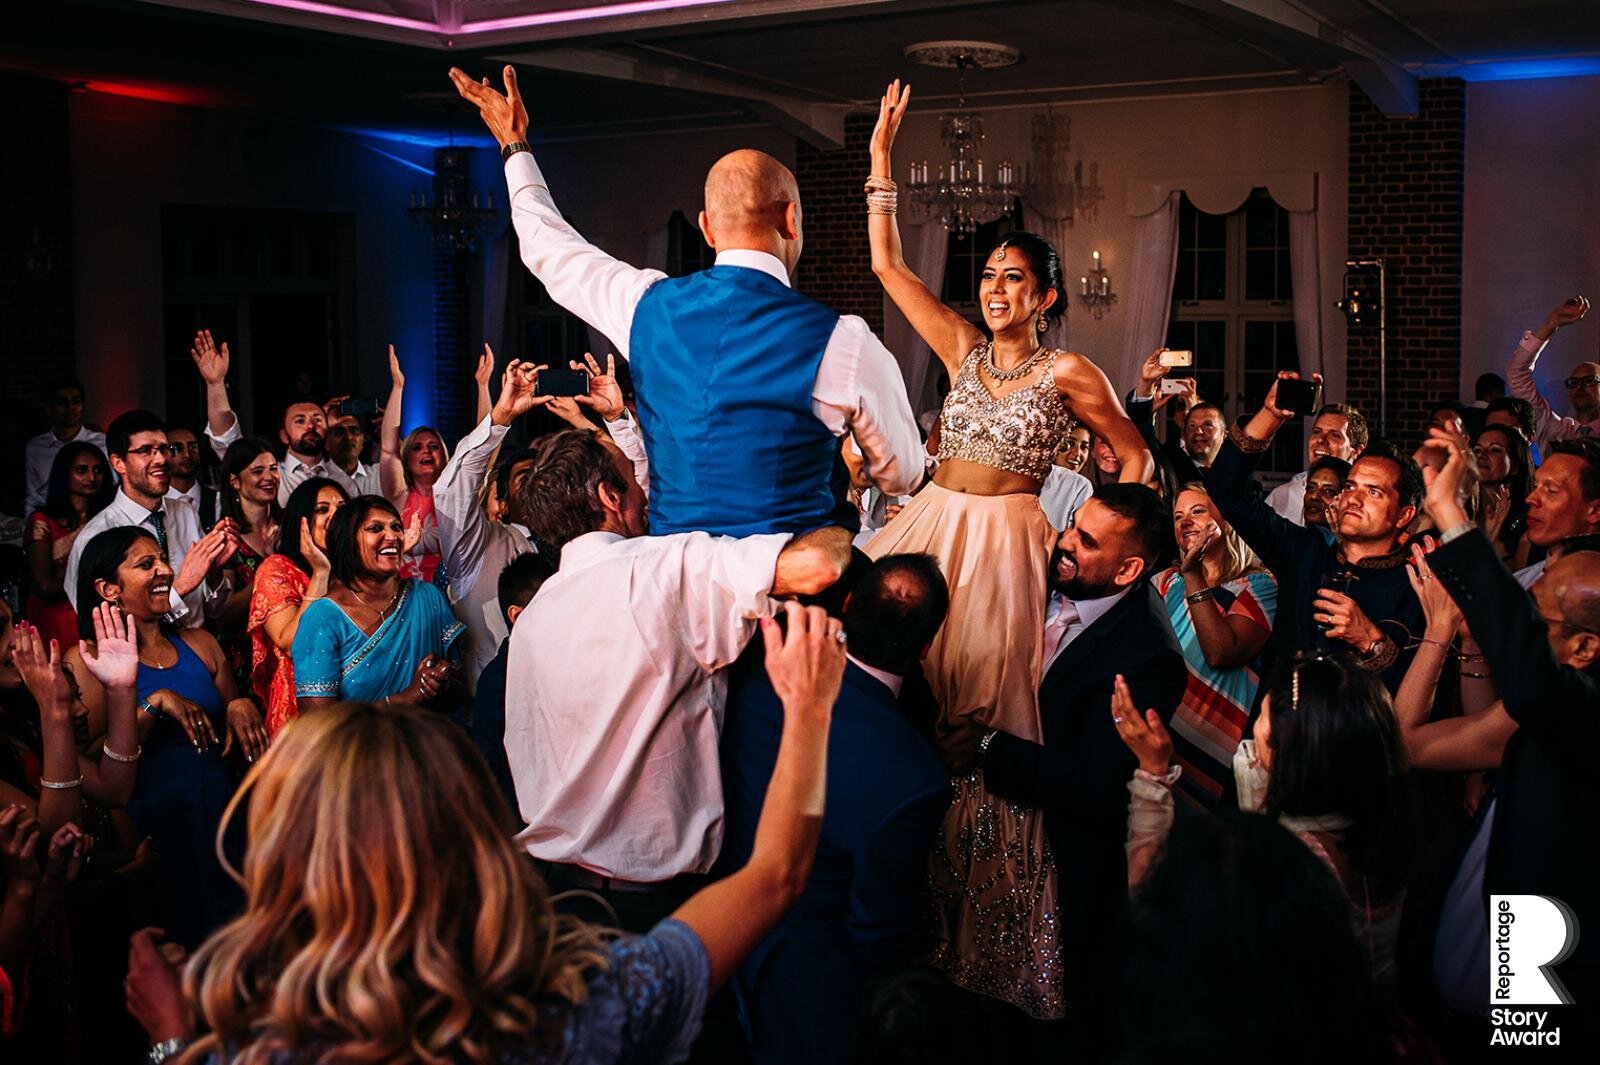  Bride and groom lifted in the air on a busy dance floor. 